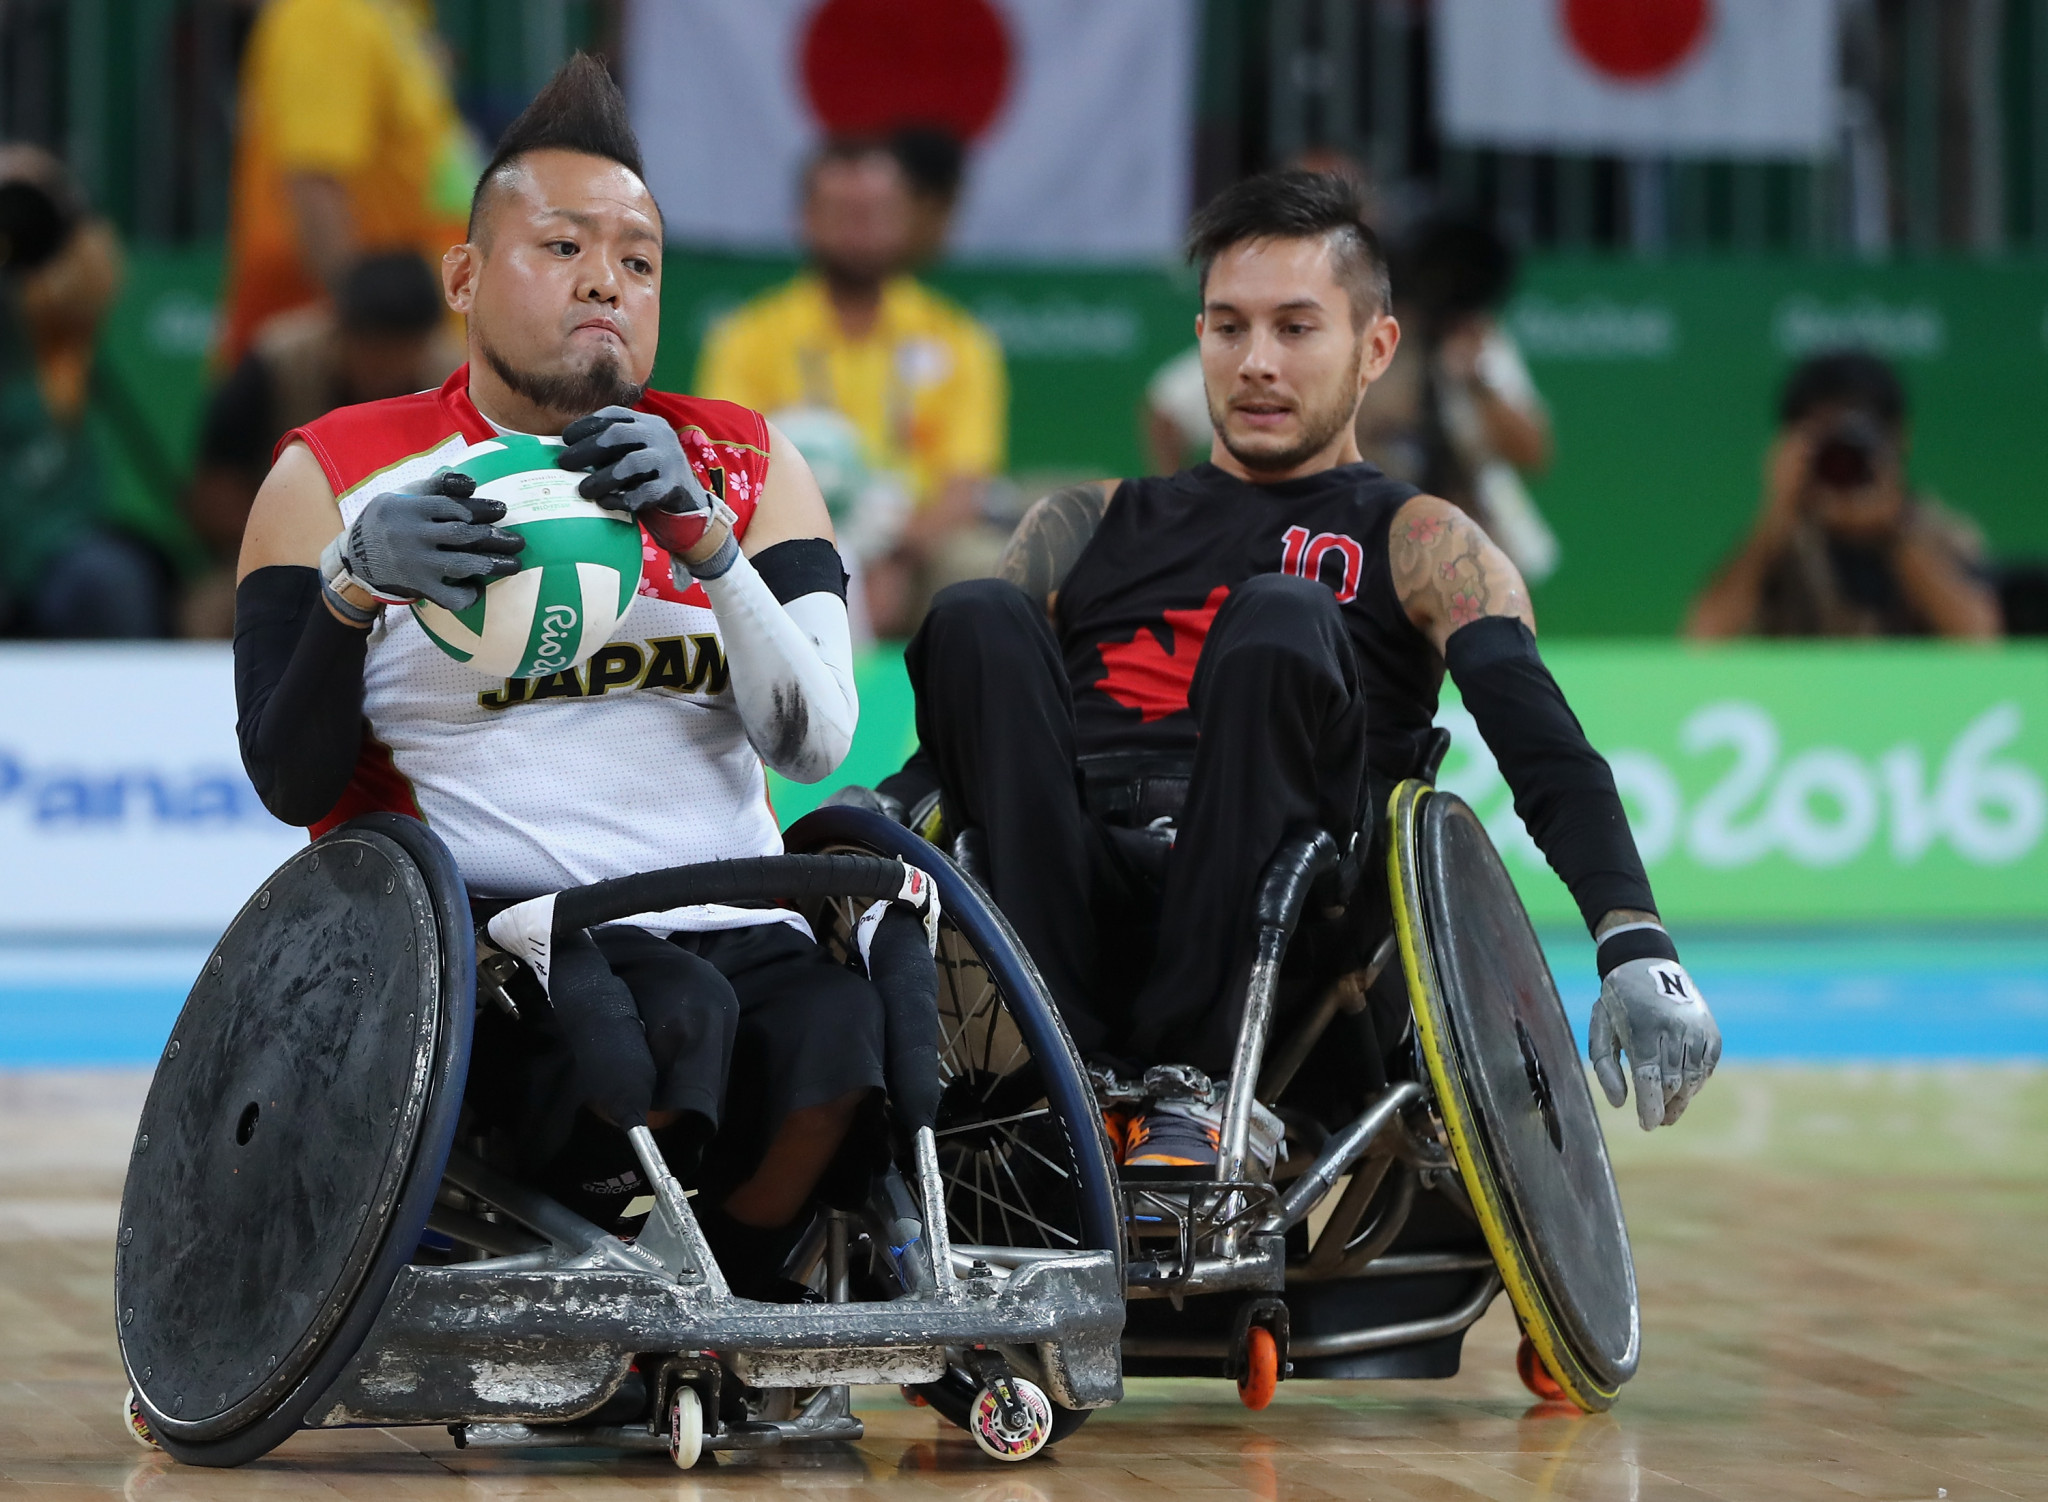 Tokyo 2020 wheelchair rugby test event cancelled due to coronavirus